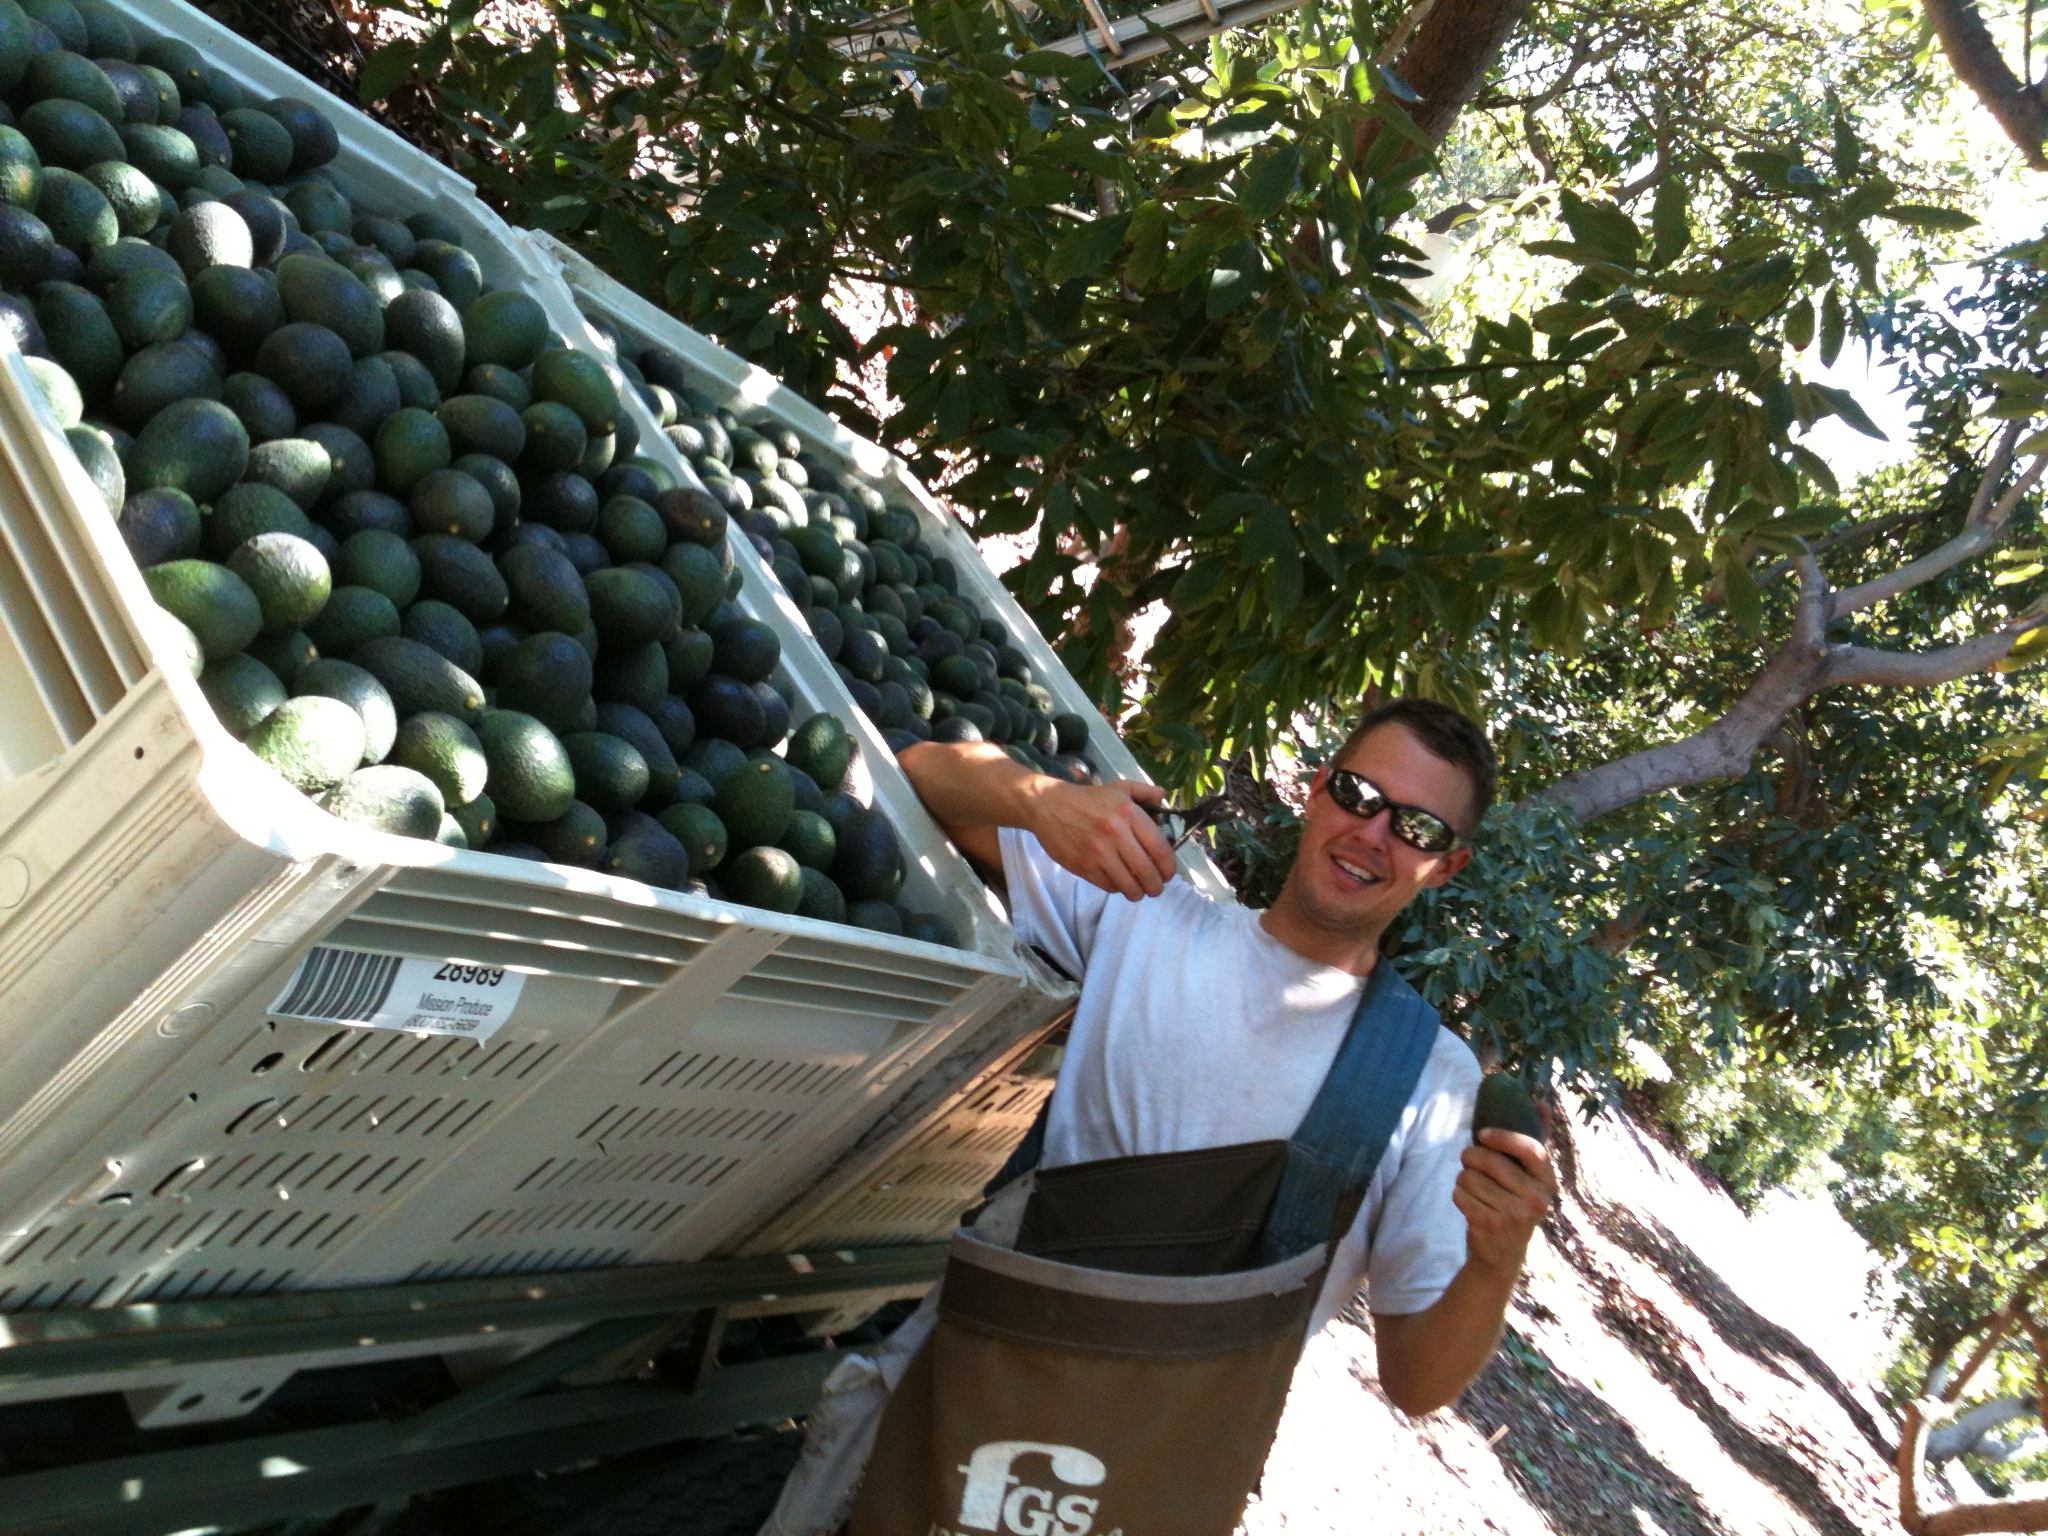 California Avocado Pickin for $ in between acting gigs - 2012